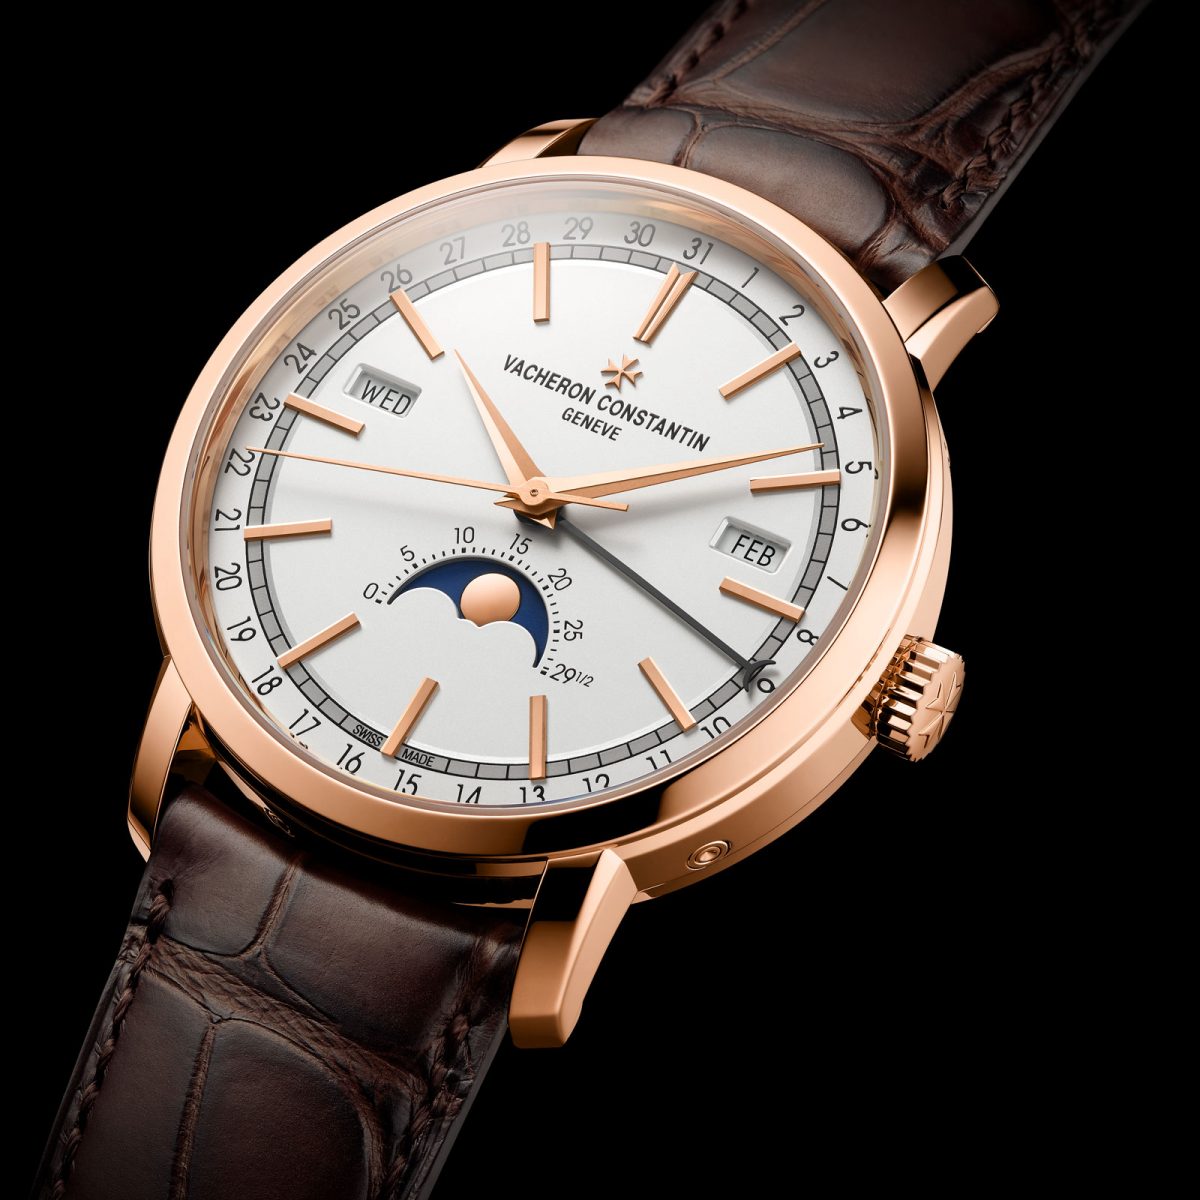 The Traditionnelle Complete Calendar - Watches of Switzerland